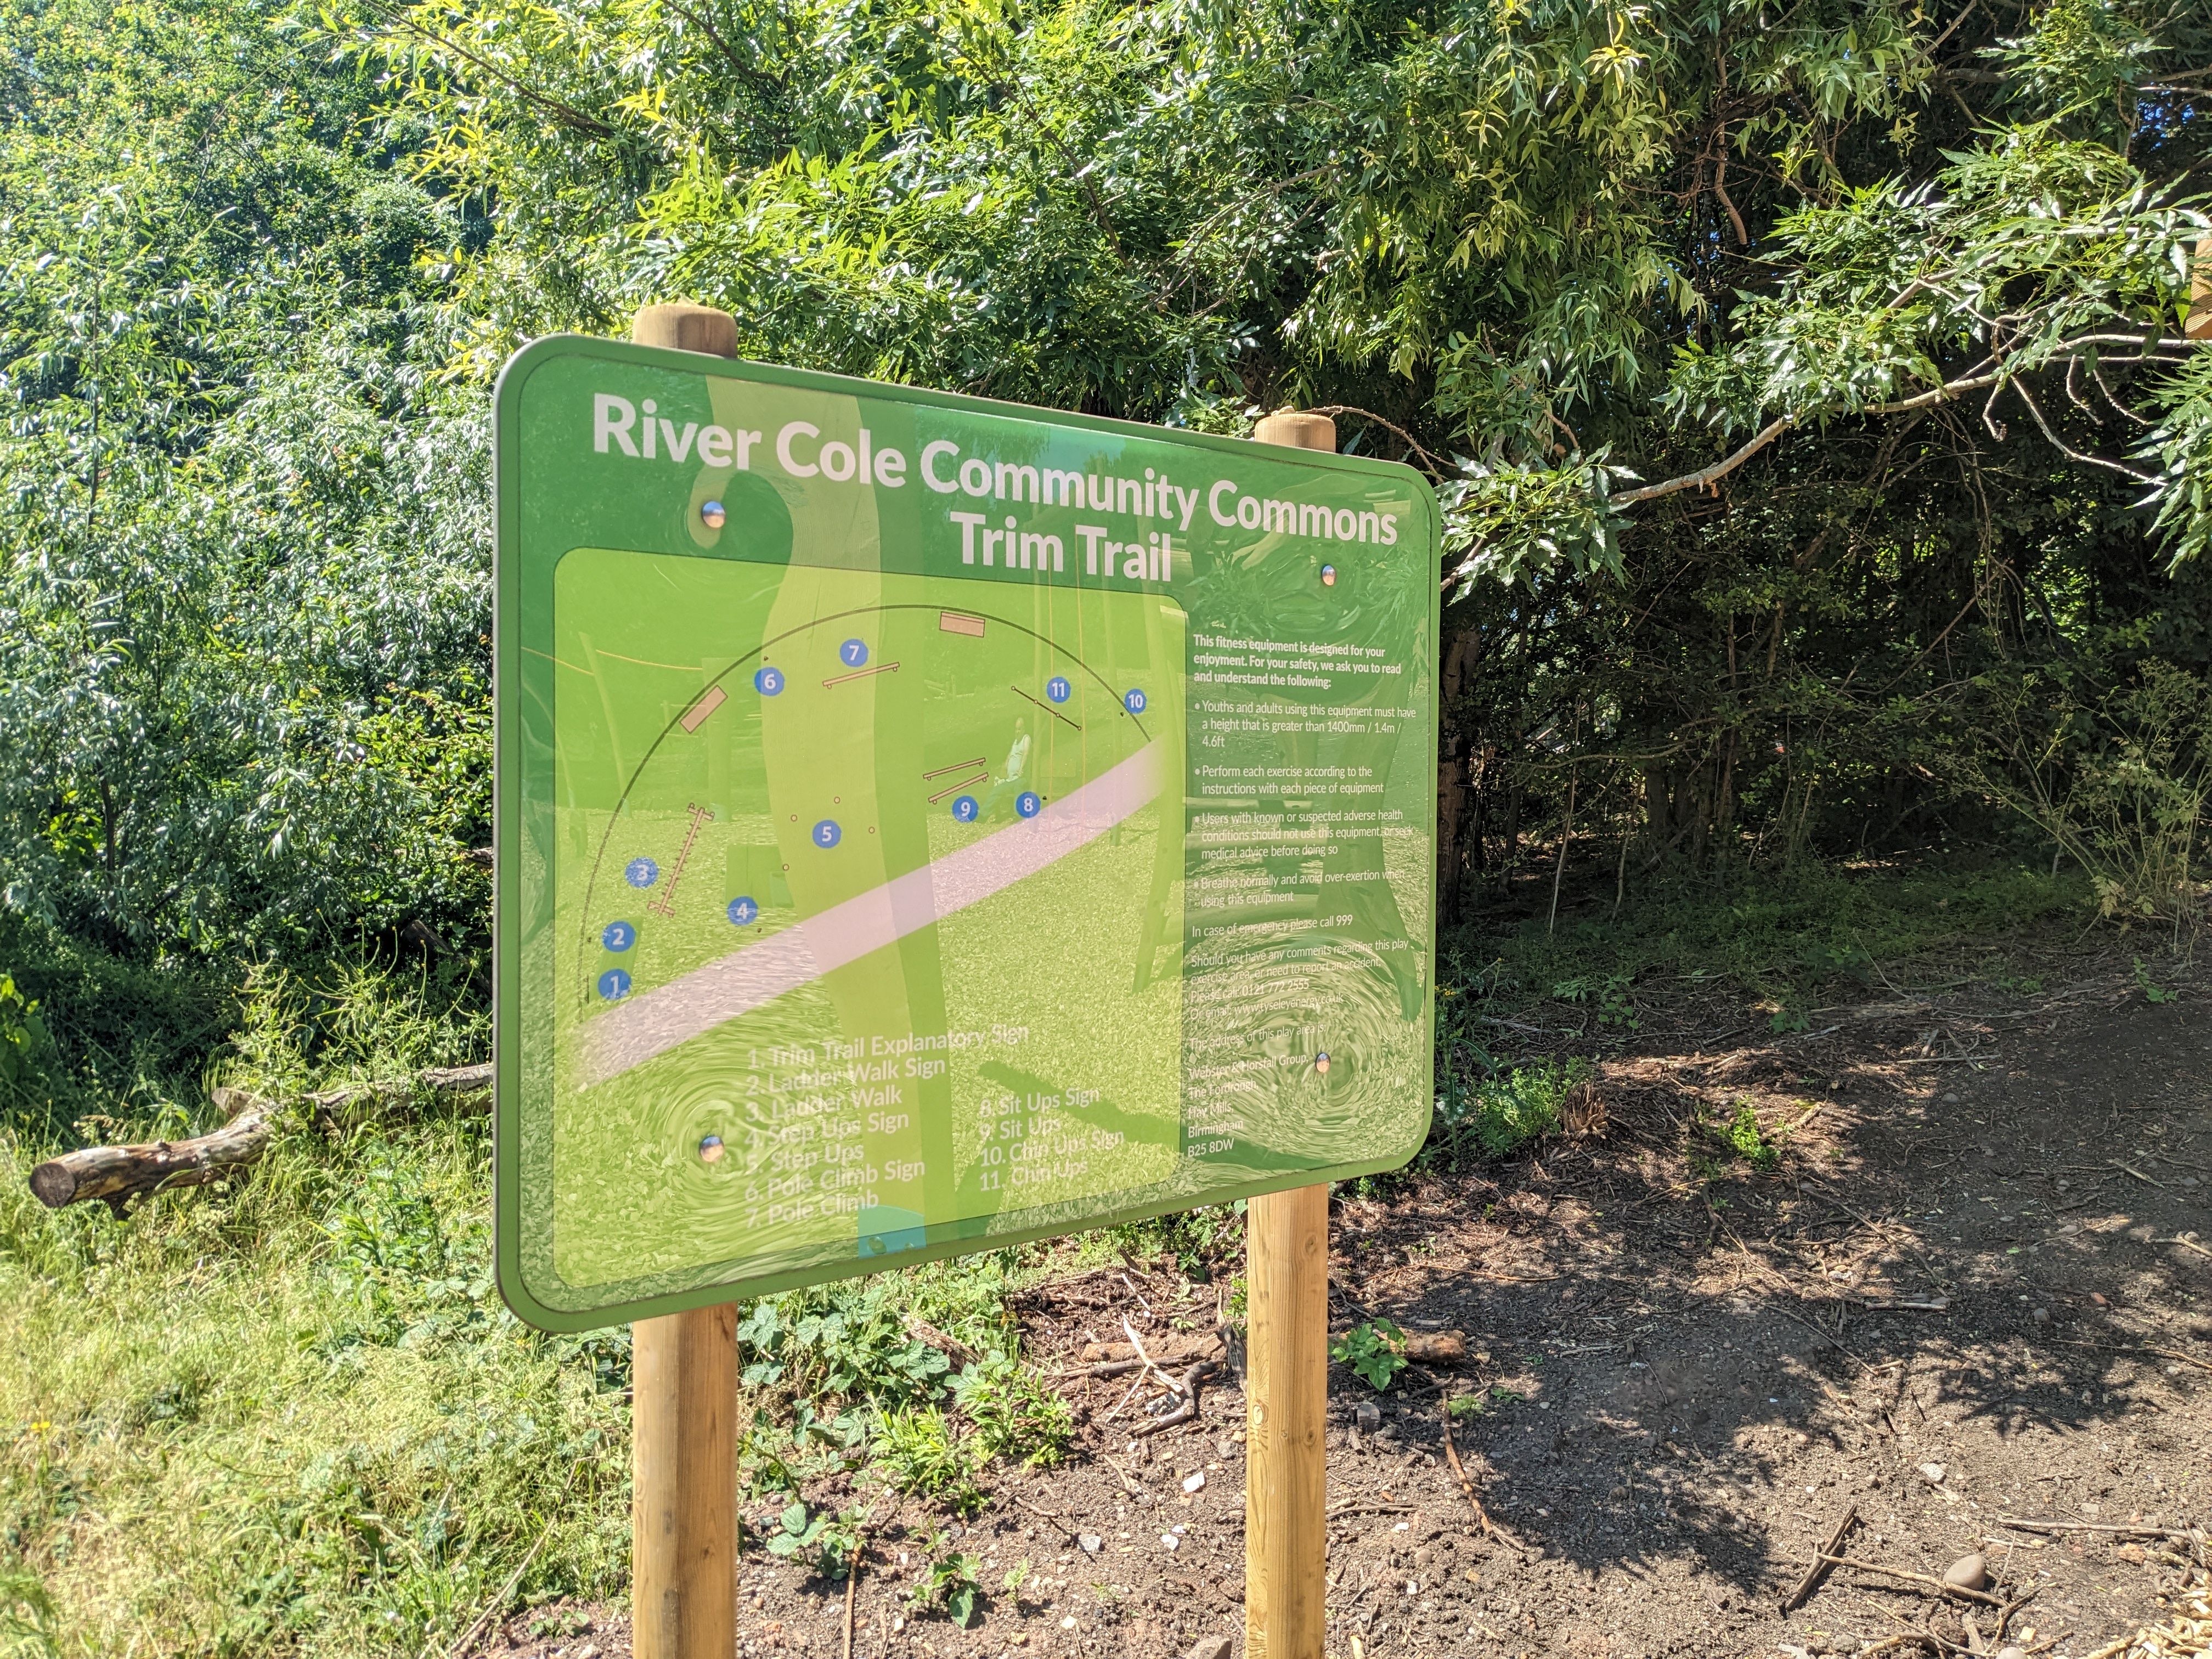 A sign shows the River Cole Community Commons Trim Trail 